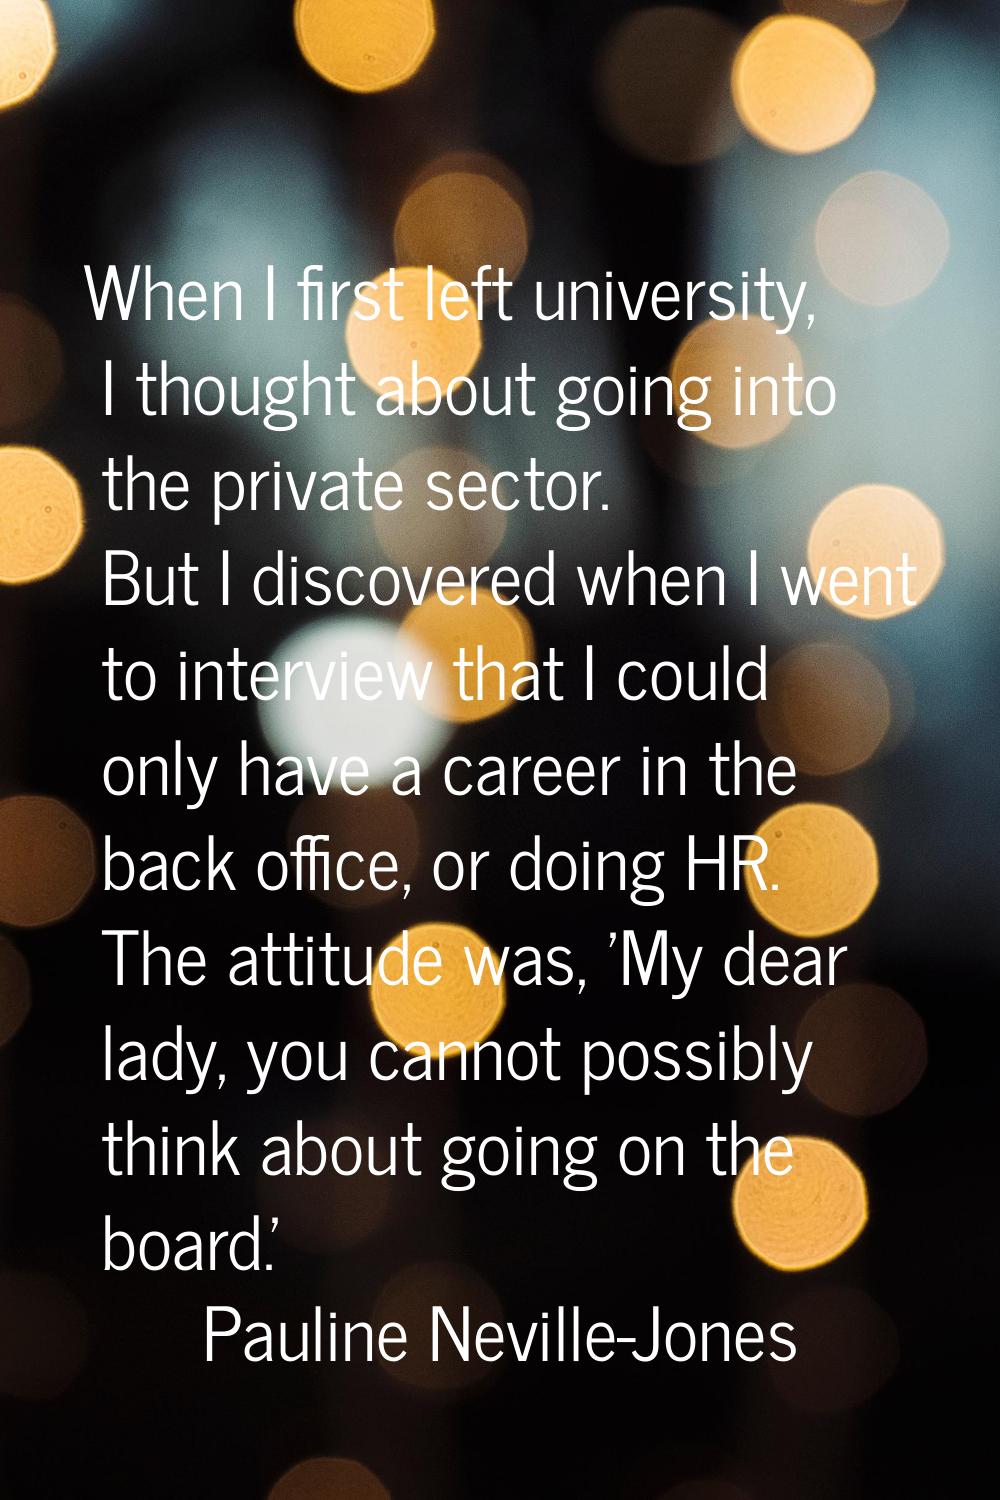 When I first left university, I thought about going into the private sector. But I discovered when 